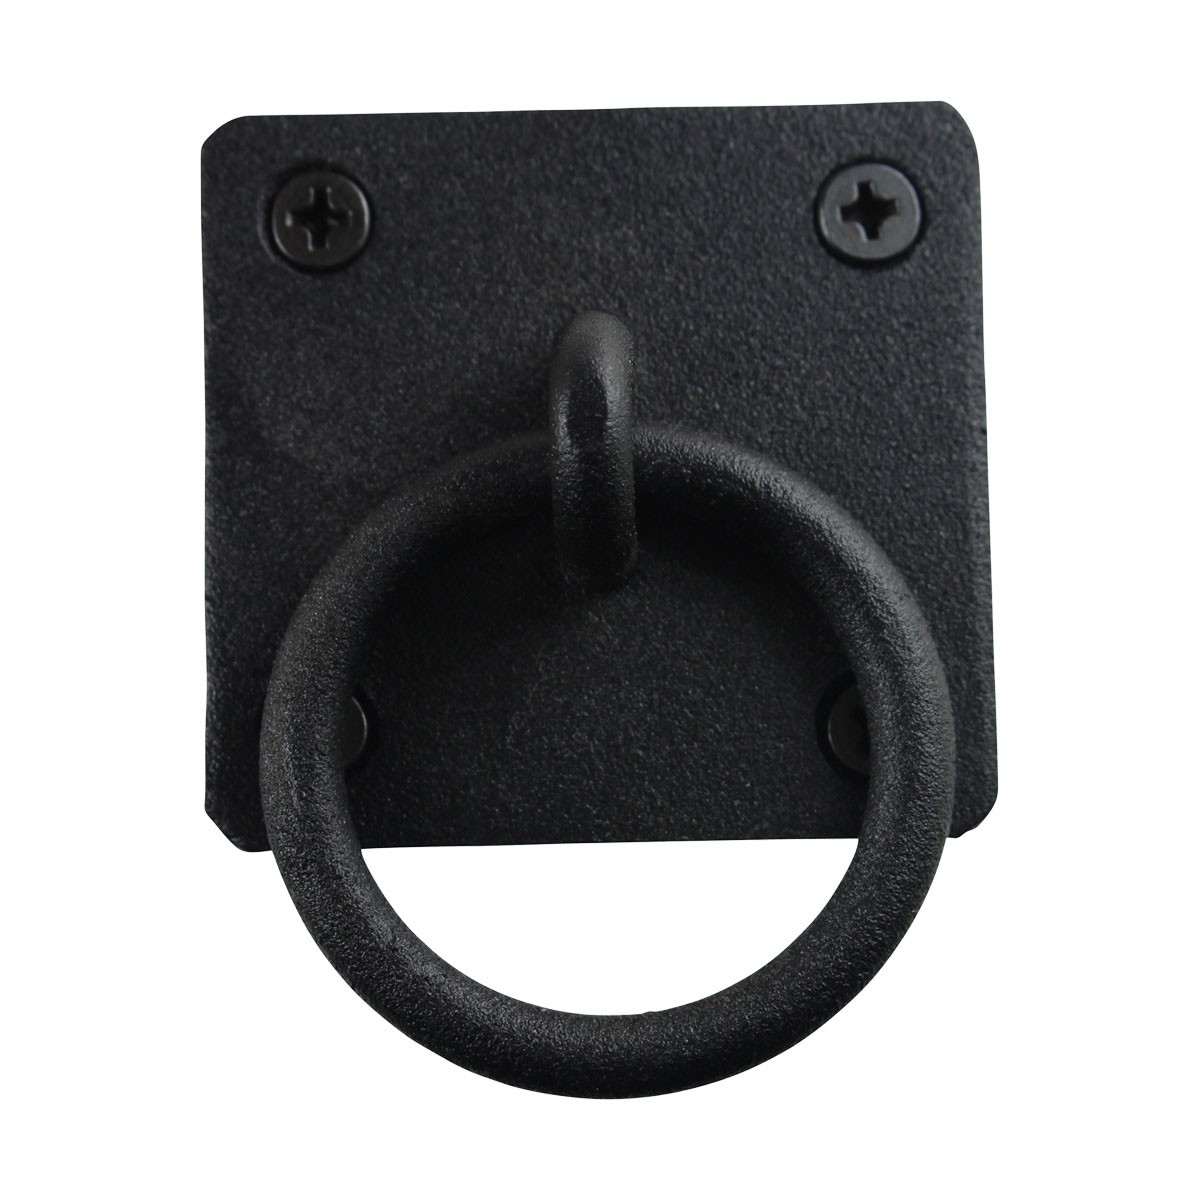 12 Black Cast Iron Ring Pull Cabinet Hardware Rustic Style | Renovator's Supply - image 5 of 7